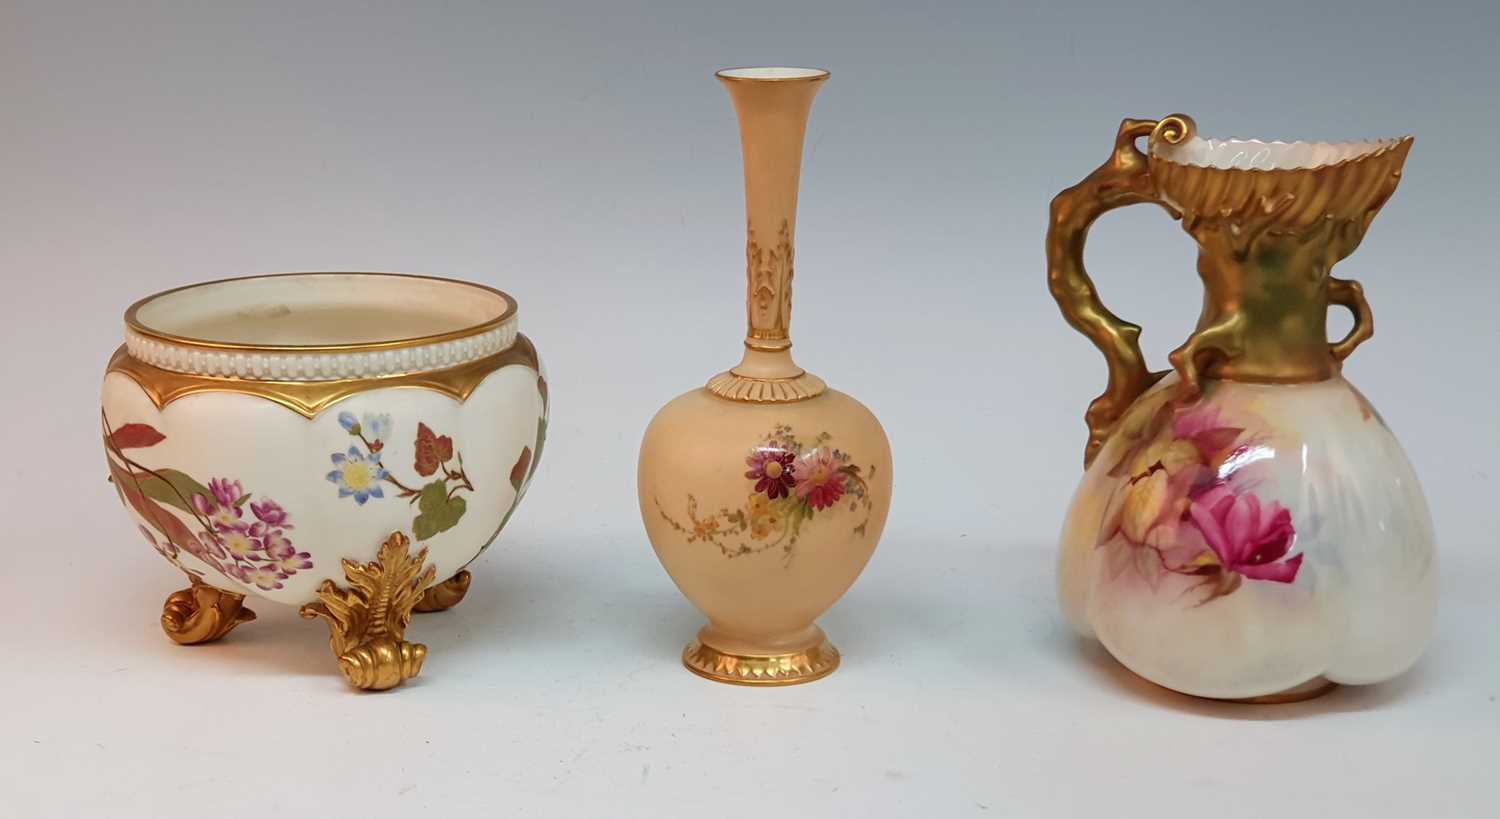 A circa 1912 Royal Worcester jug, shape 1507, decorated with roses, puce mark to the underside, h. - Image 2 of 2